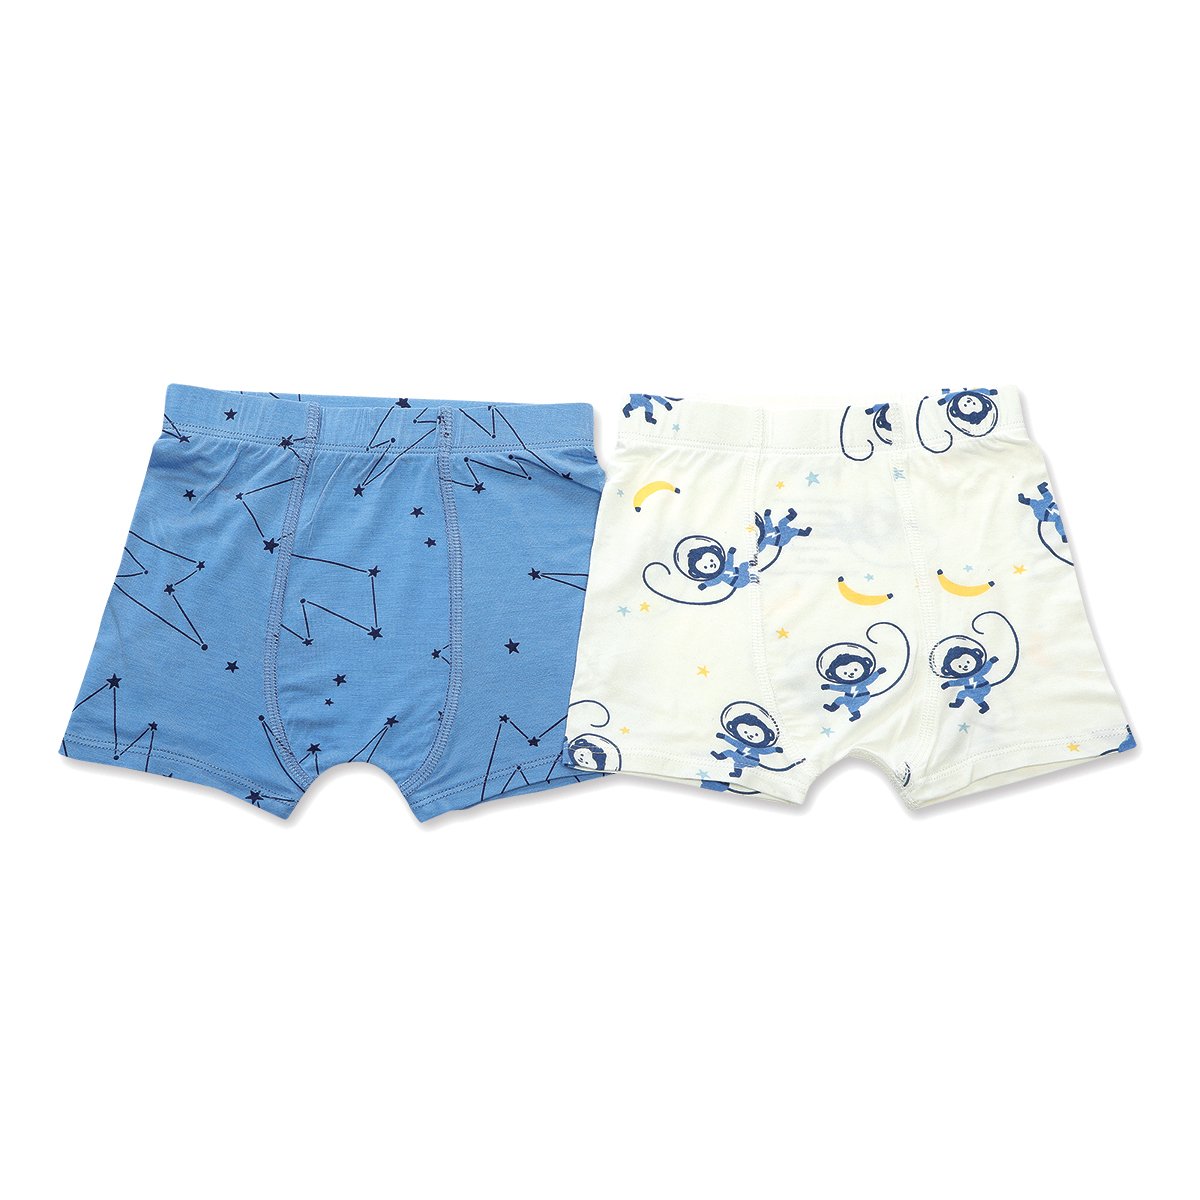 Bamboo Boys Underwear Shorts 2 pack (Light Up the Sky Print/Space Monk 